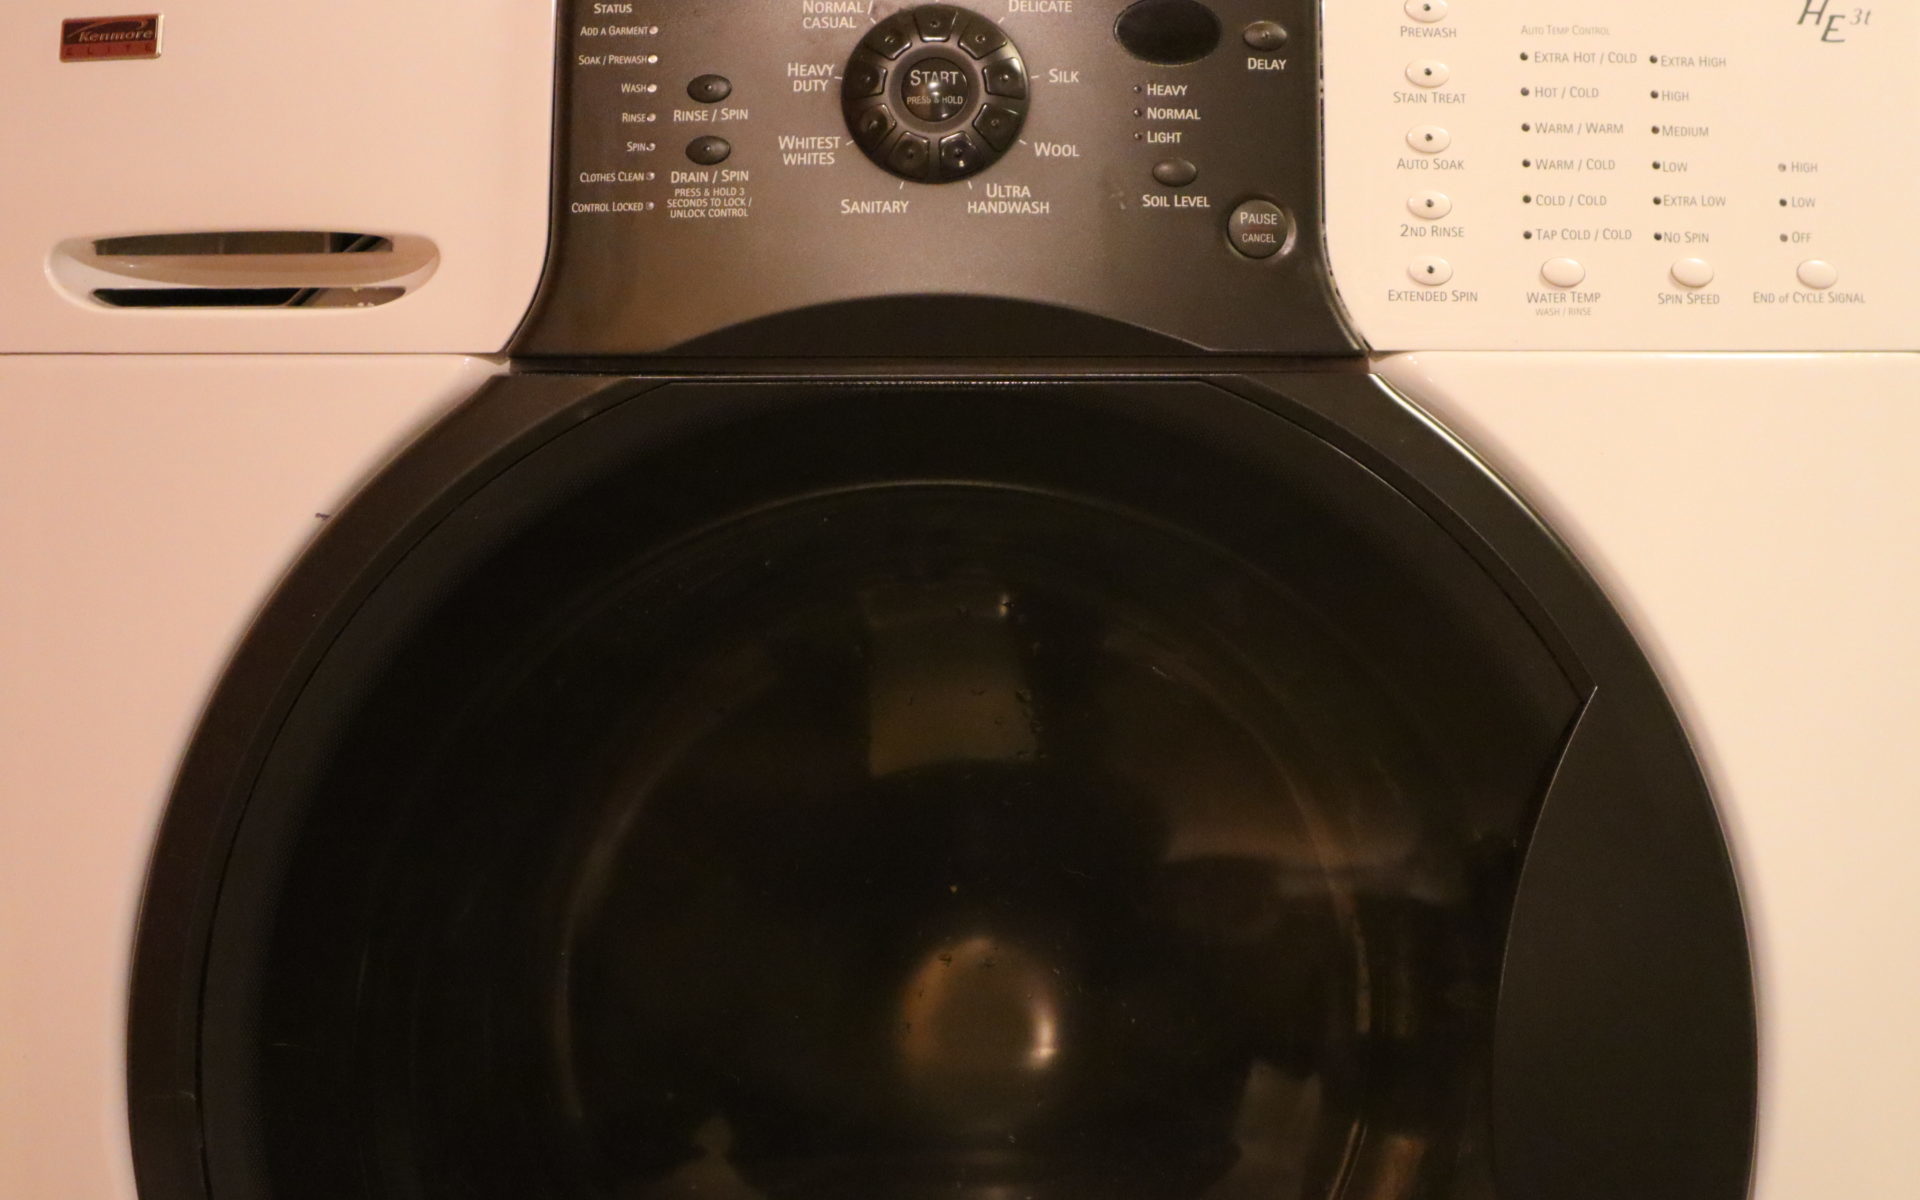 Kenmore Whirlpool HE3t Washer Front